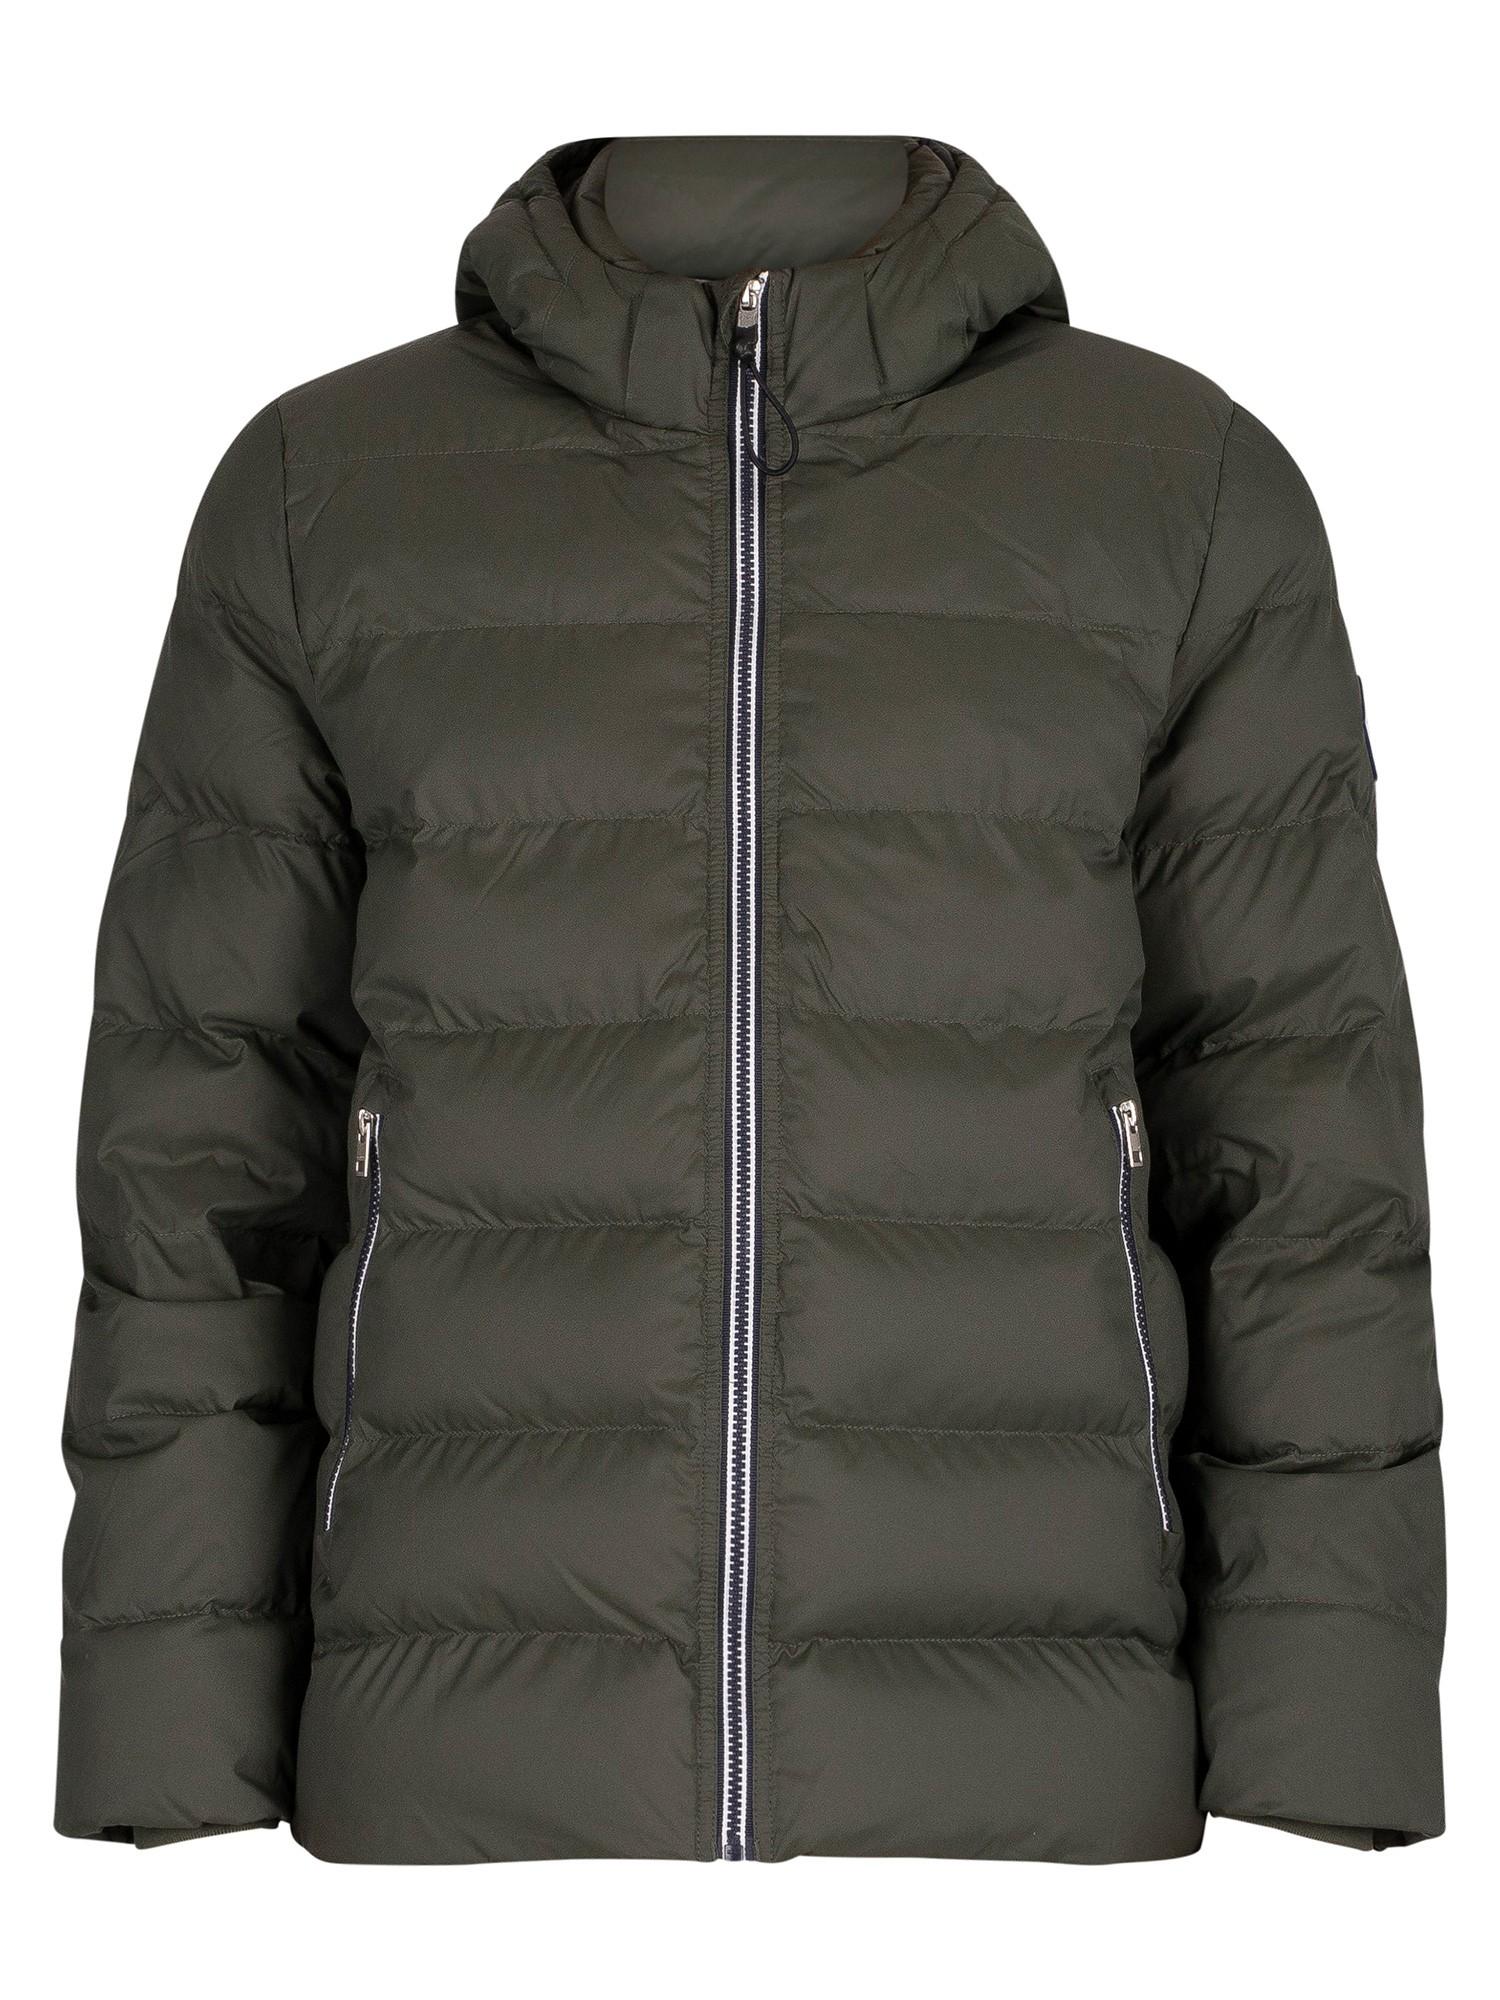 GANT The Active Cloud Jacket in Green for Men - Lyst